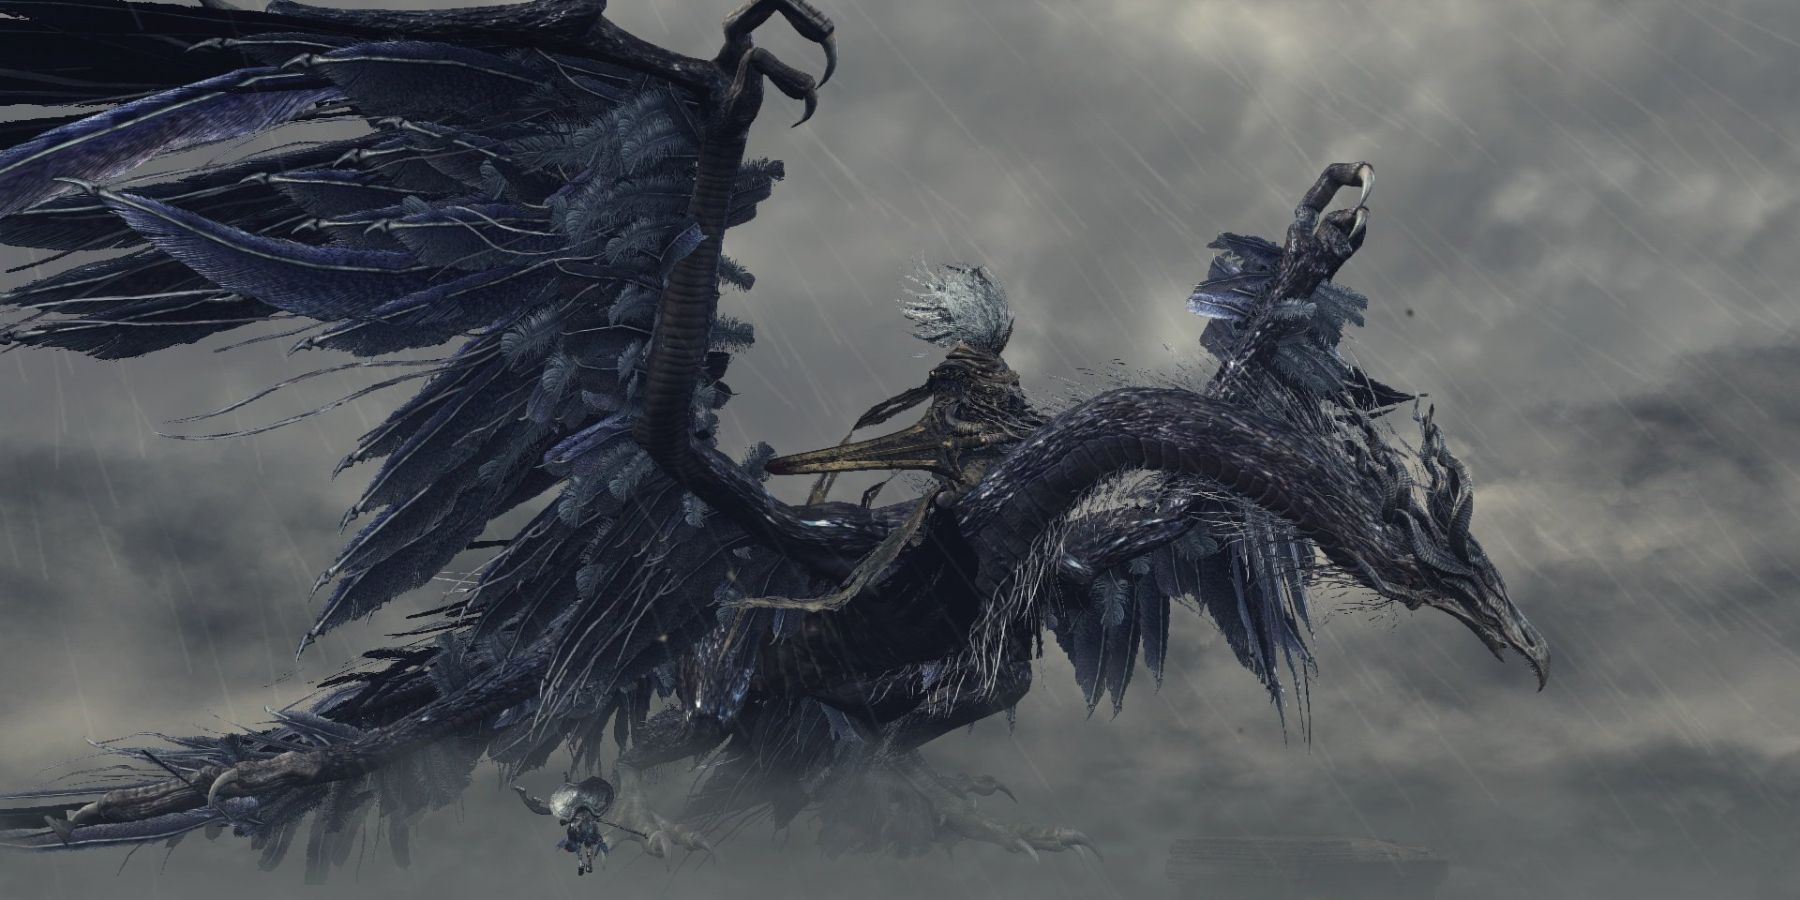 The Nameless King rides a Wyvern